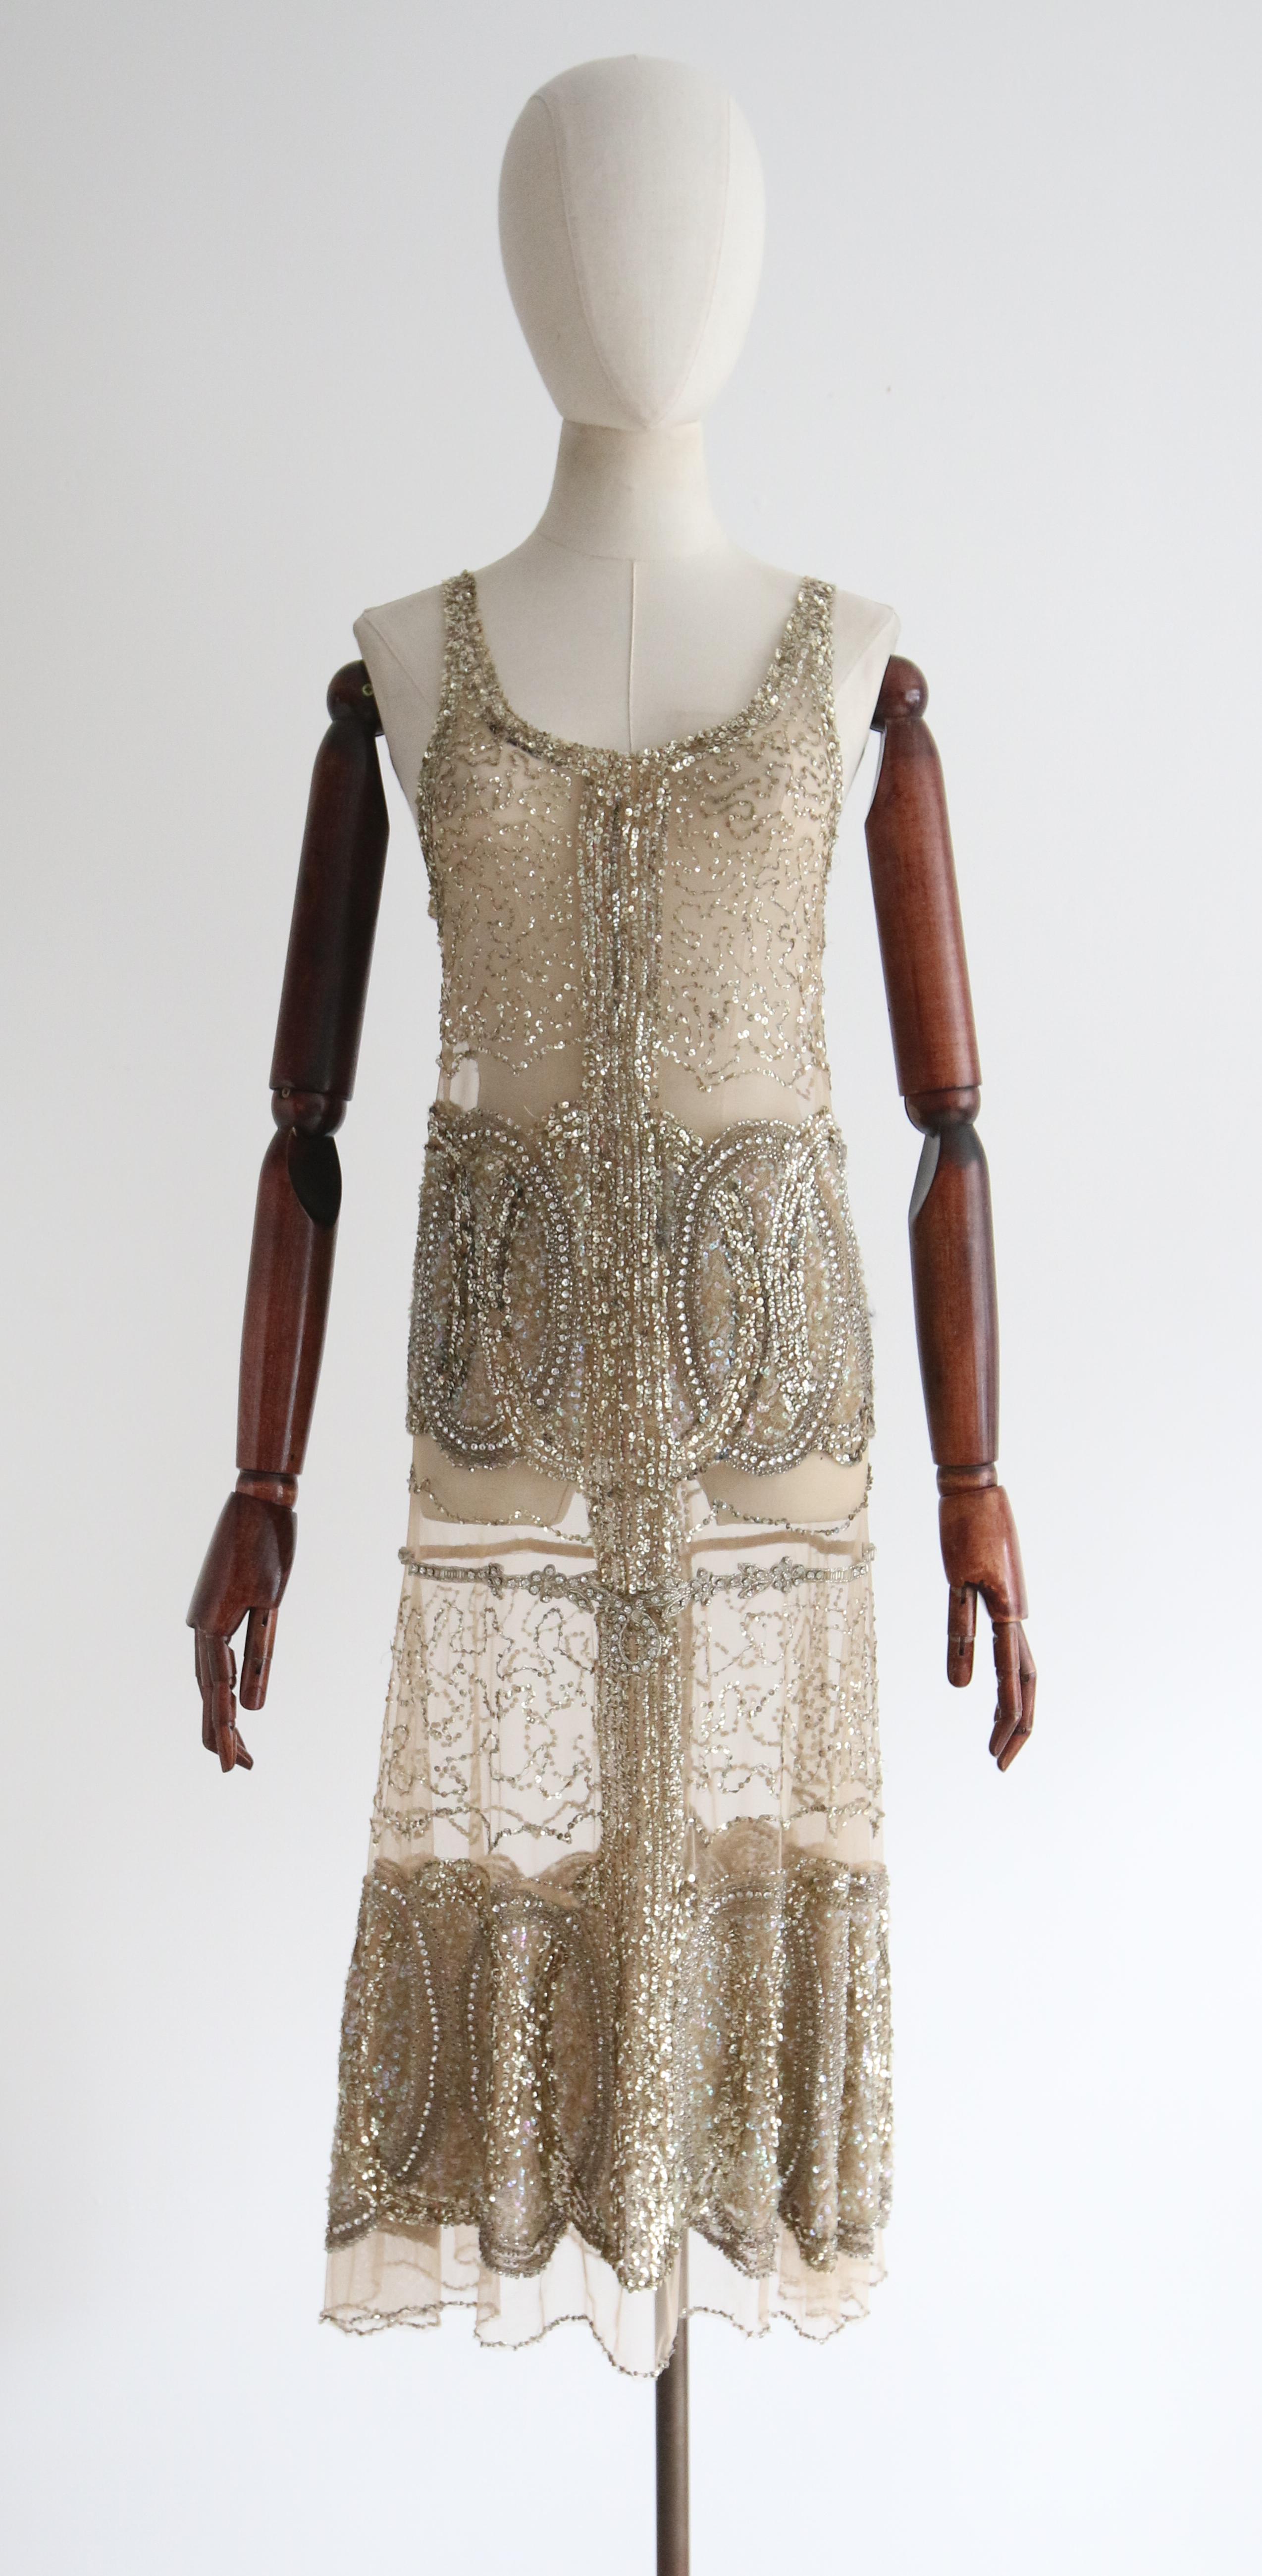 Full of opulent original details, rendered in the most luxurious fashion, this rare 1920's piece is a beauty to behold and never again find.

The rounded neckline of the dress, is framed by a border of gold sequin embellishments, which join a